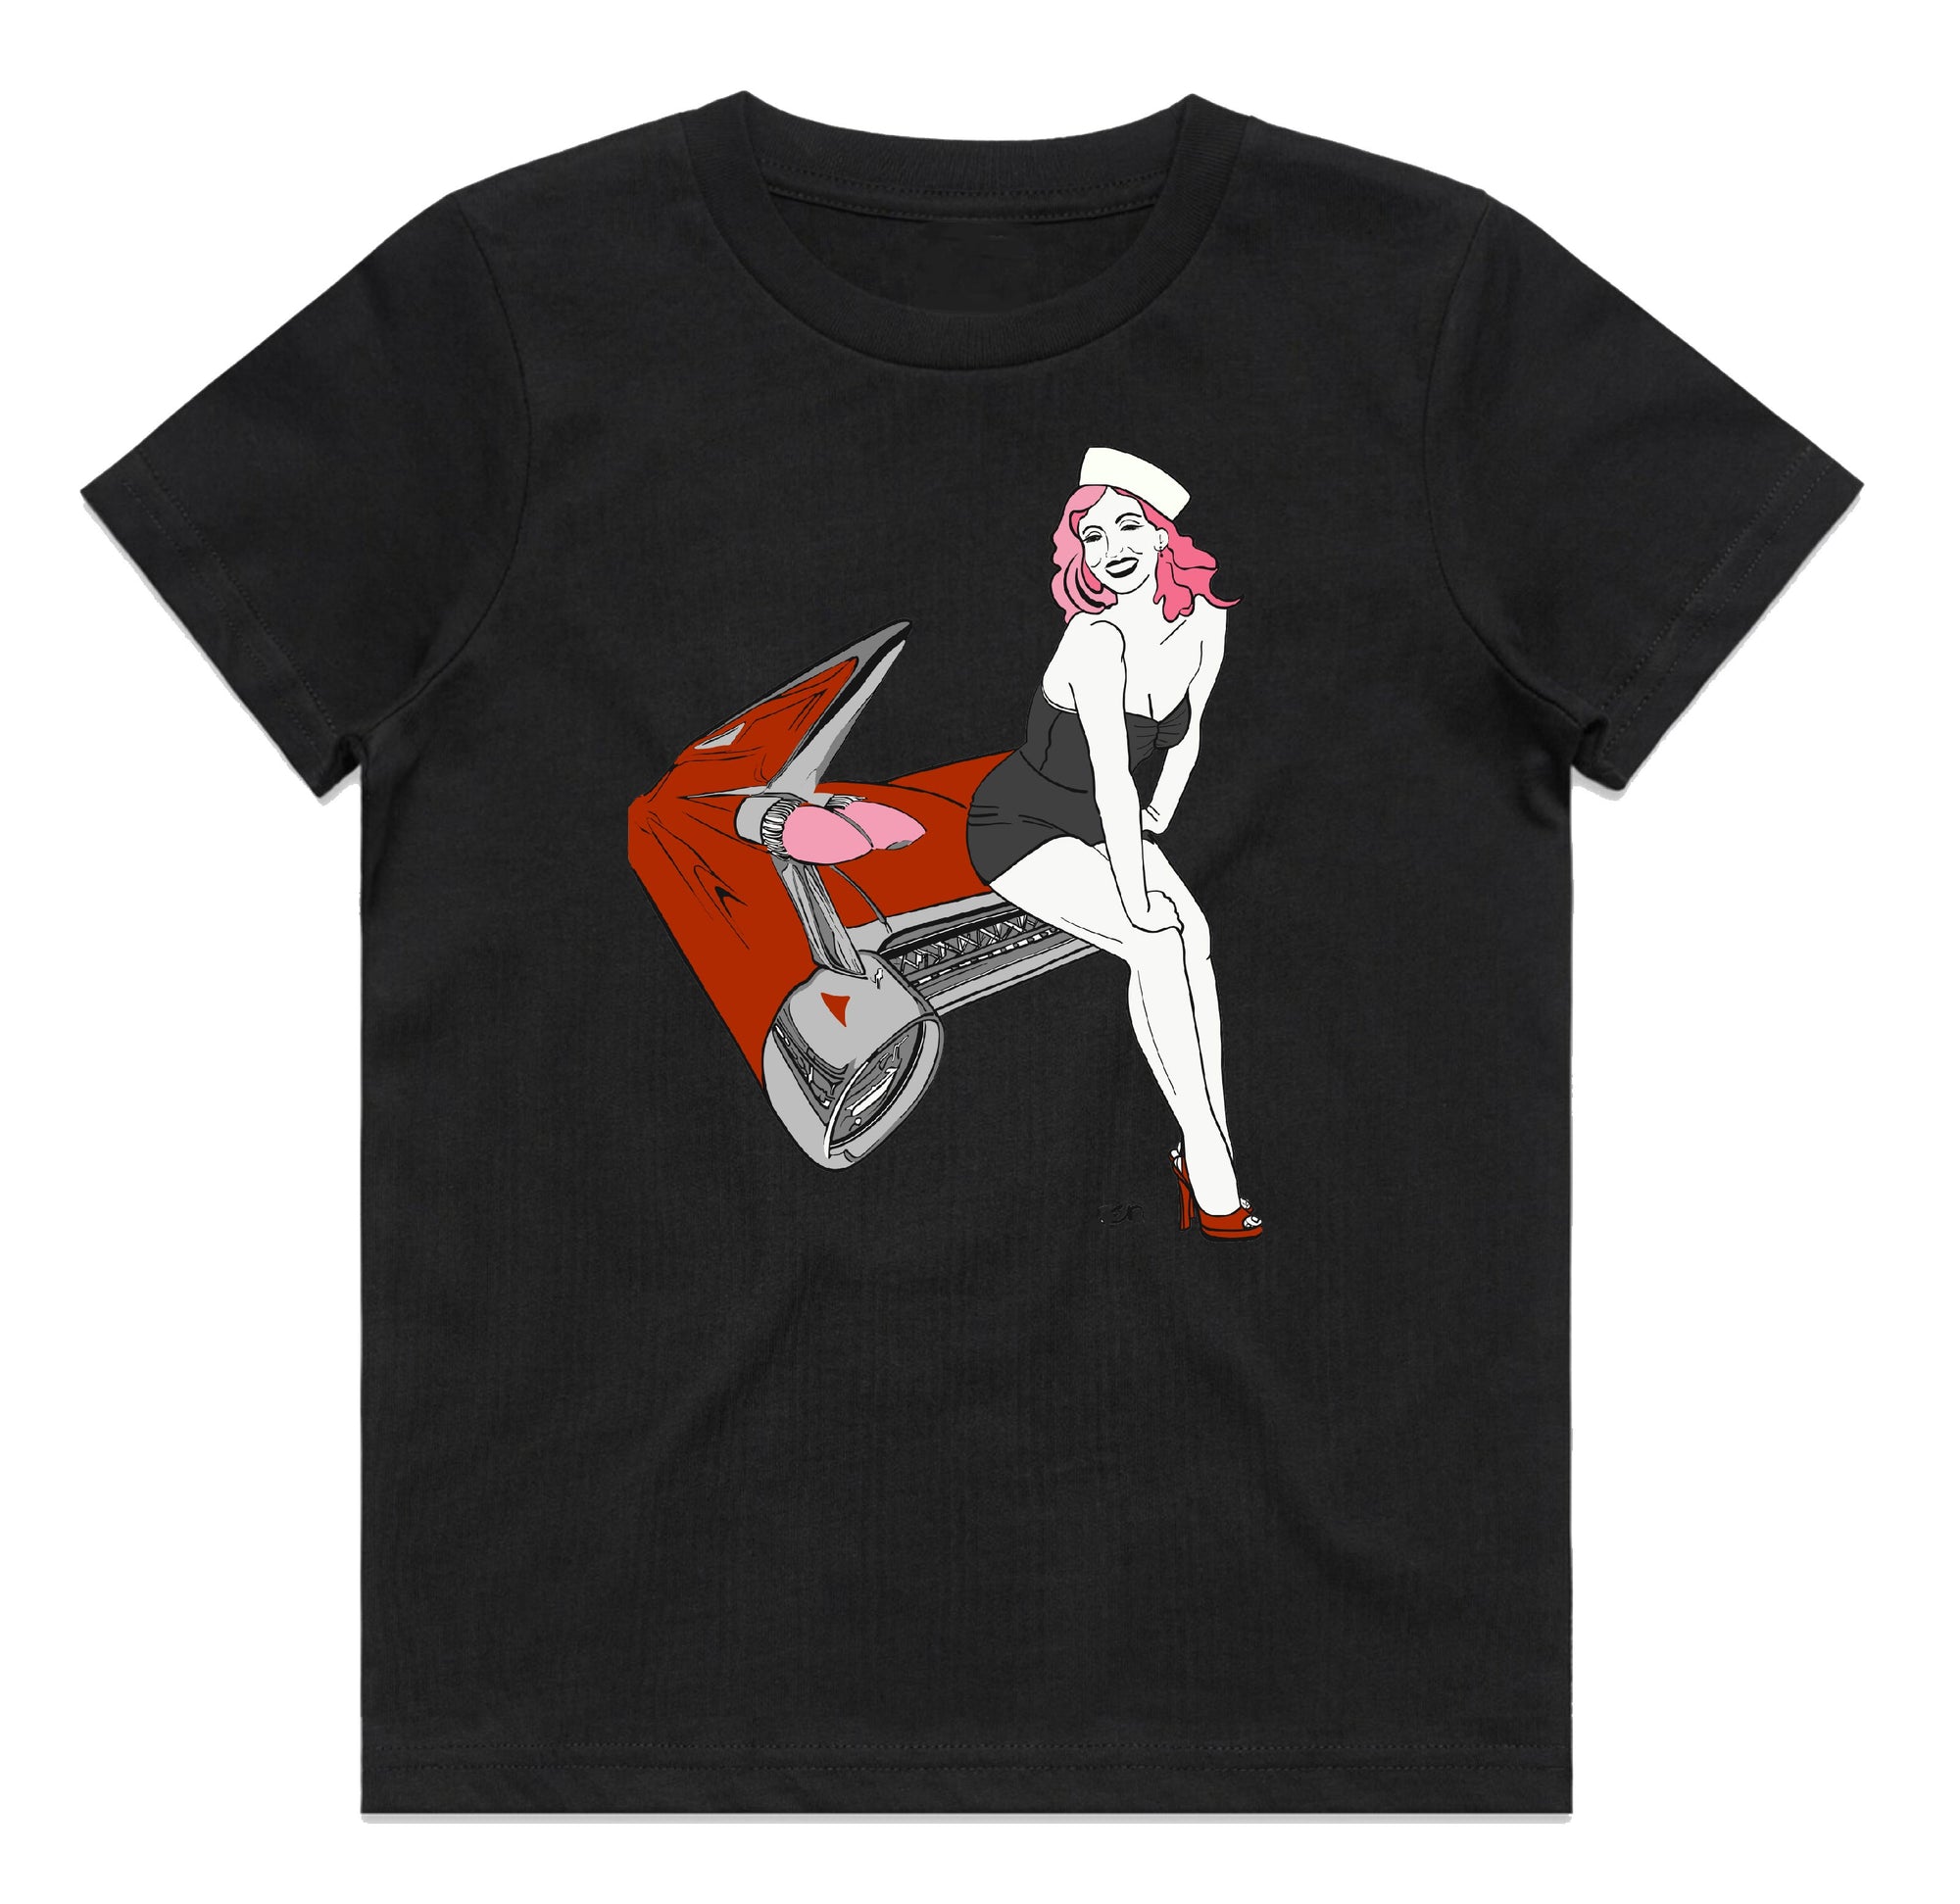 '59 FINS' BACKEND TAILLIGHTS 59 CADILLAC SAILOR GIRL KIDS TEE